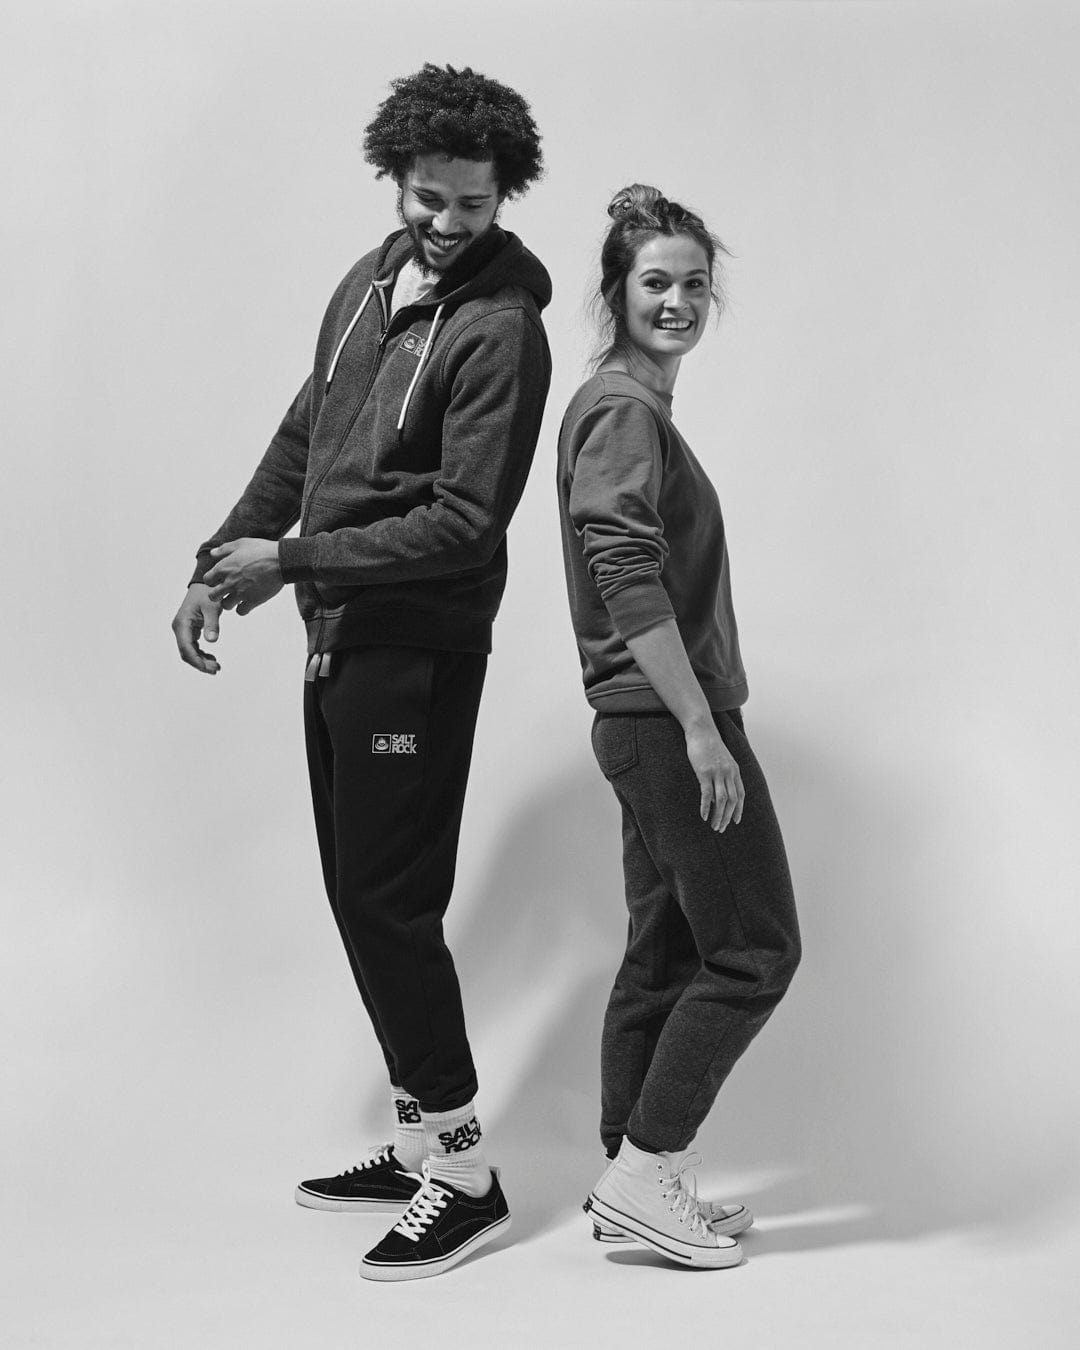 A black and white photo of a man and woman posing for a photo, both wearing hoodies with Saltrock Original - Mens Zip Hood - Dark Grey branding.